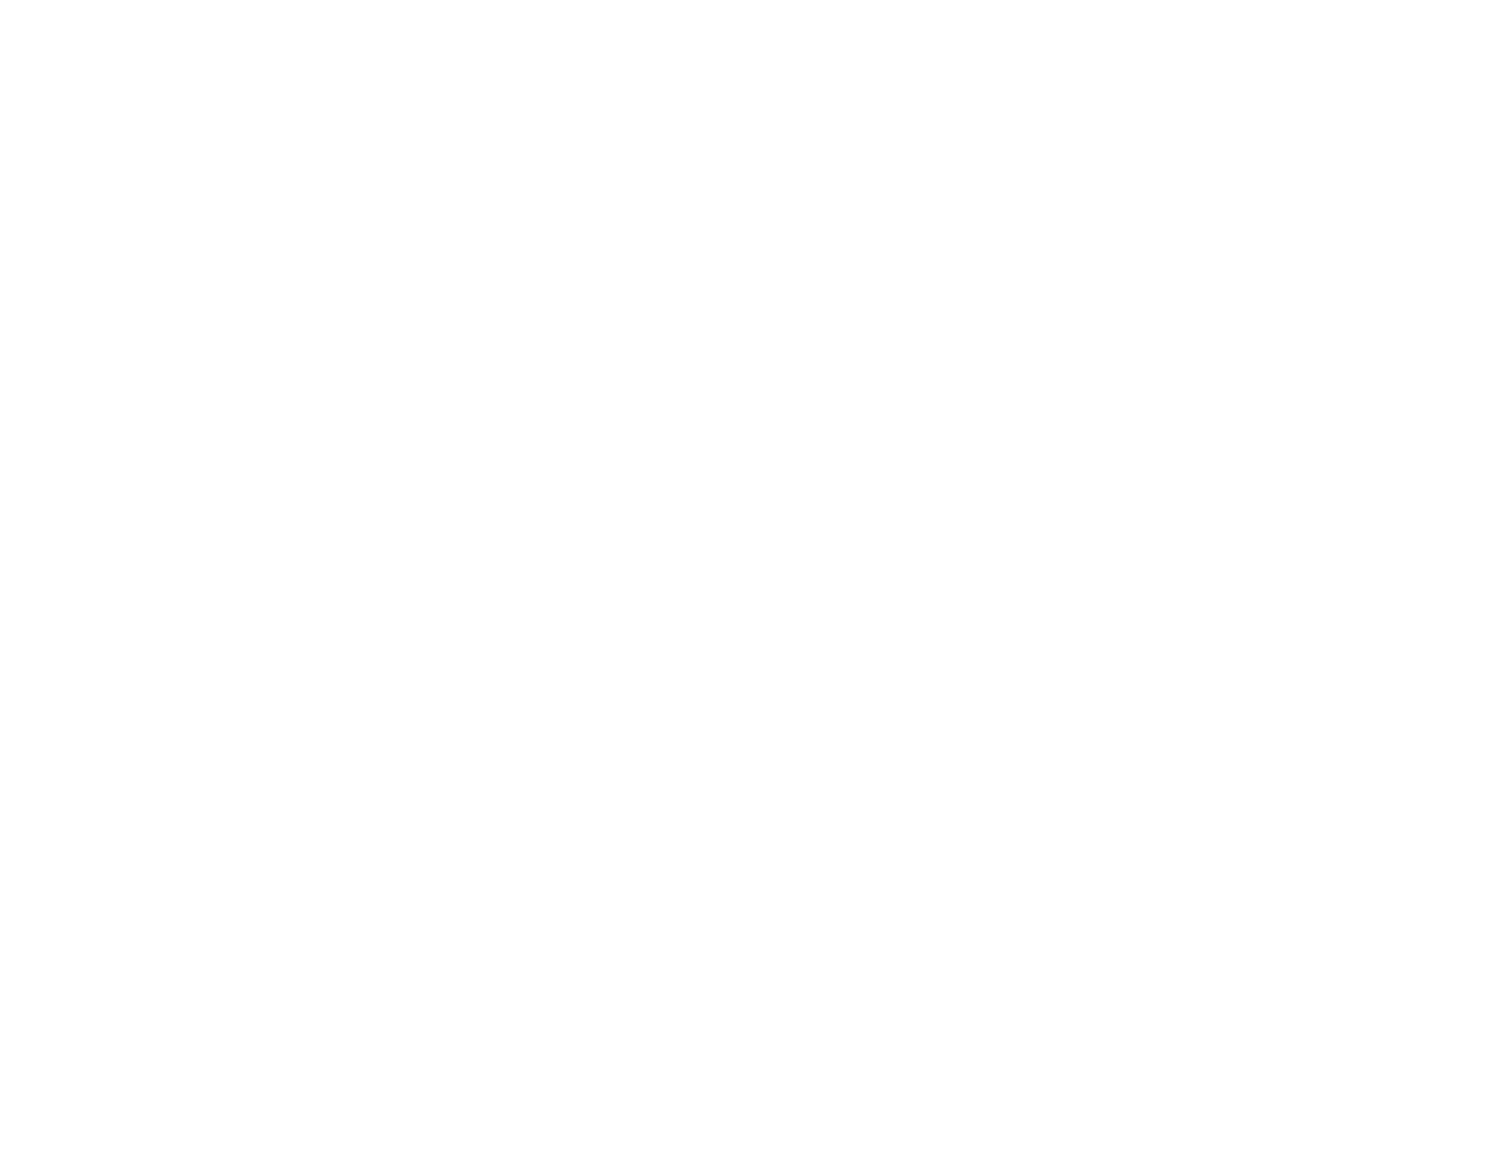 powered by kubernetes